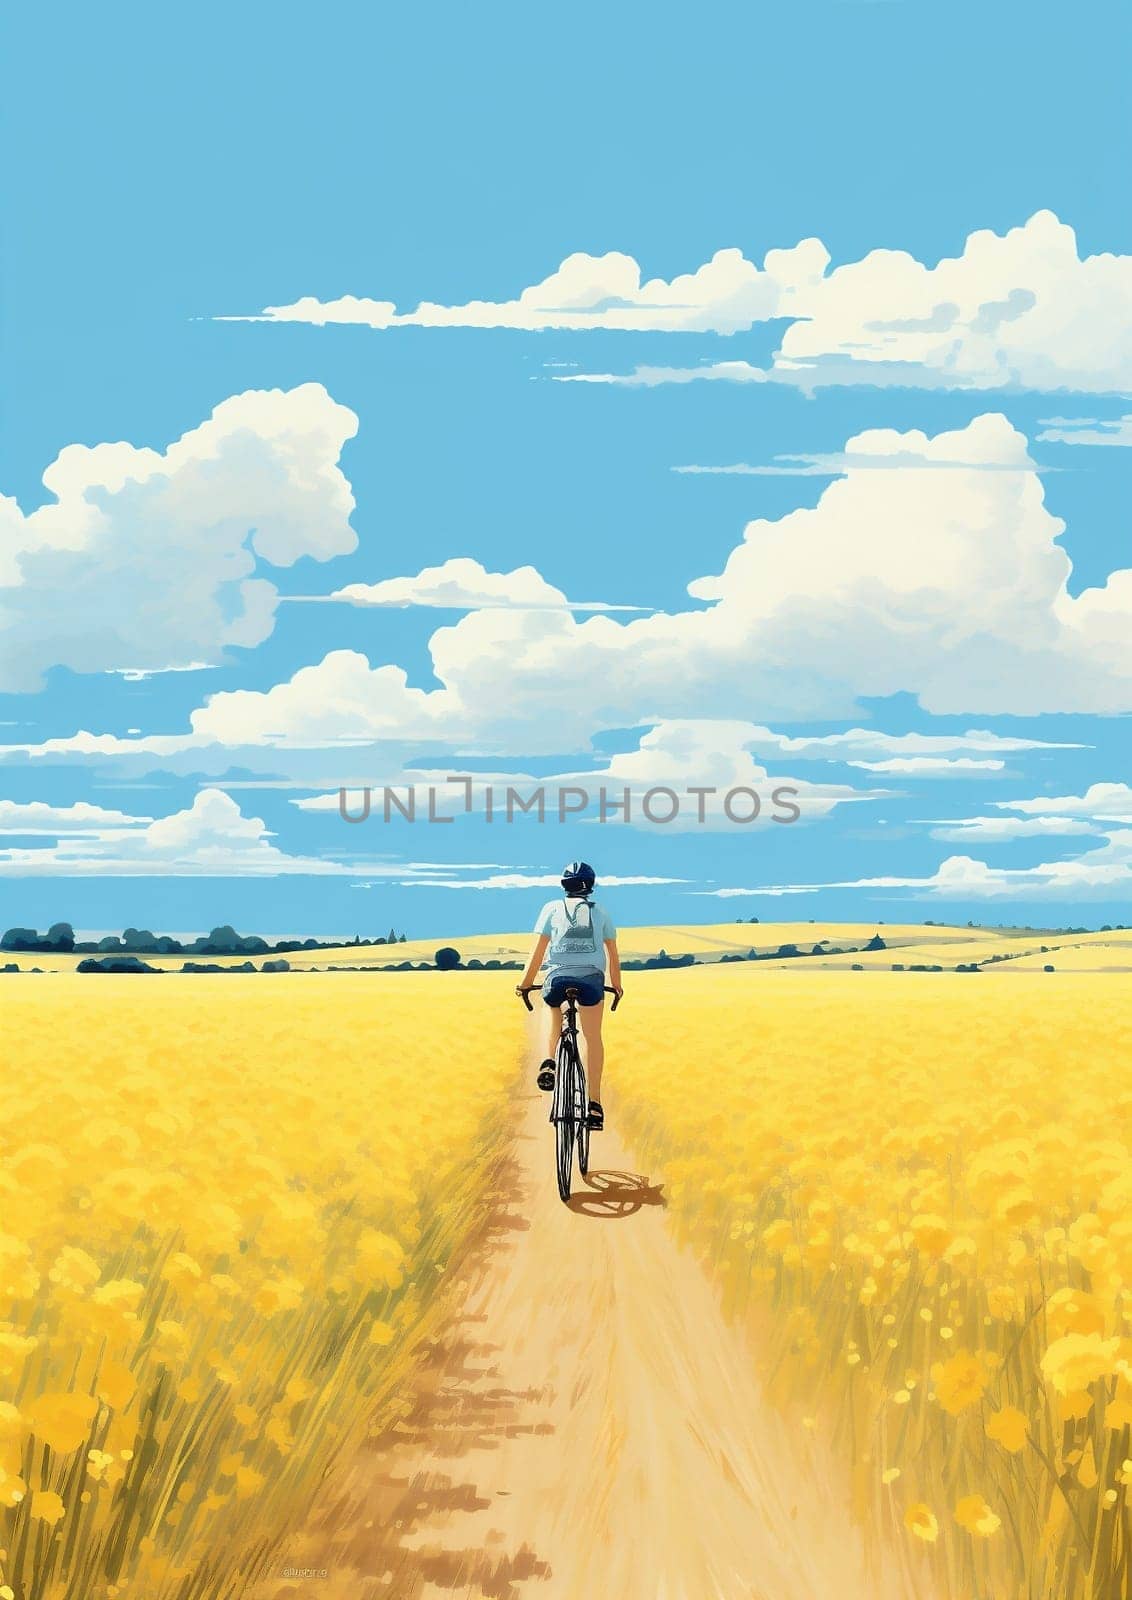 Road yellow green blue field country nature sky agricultural summer rural landscape by Vichizh